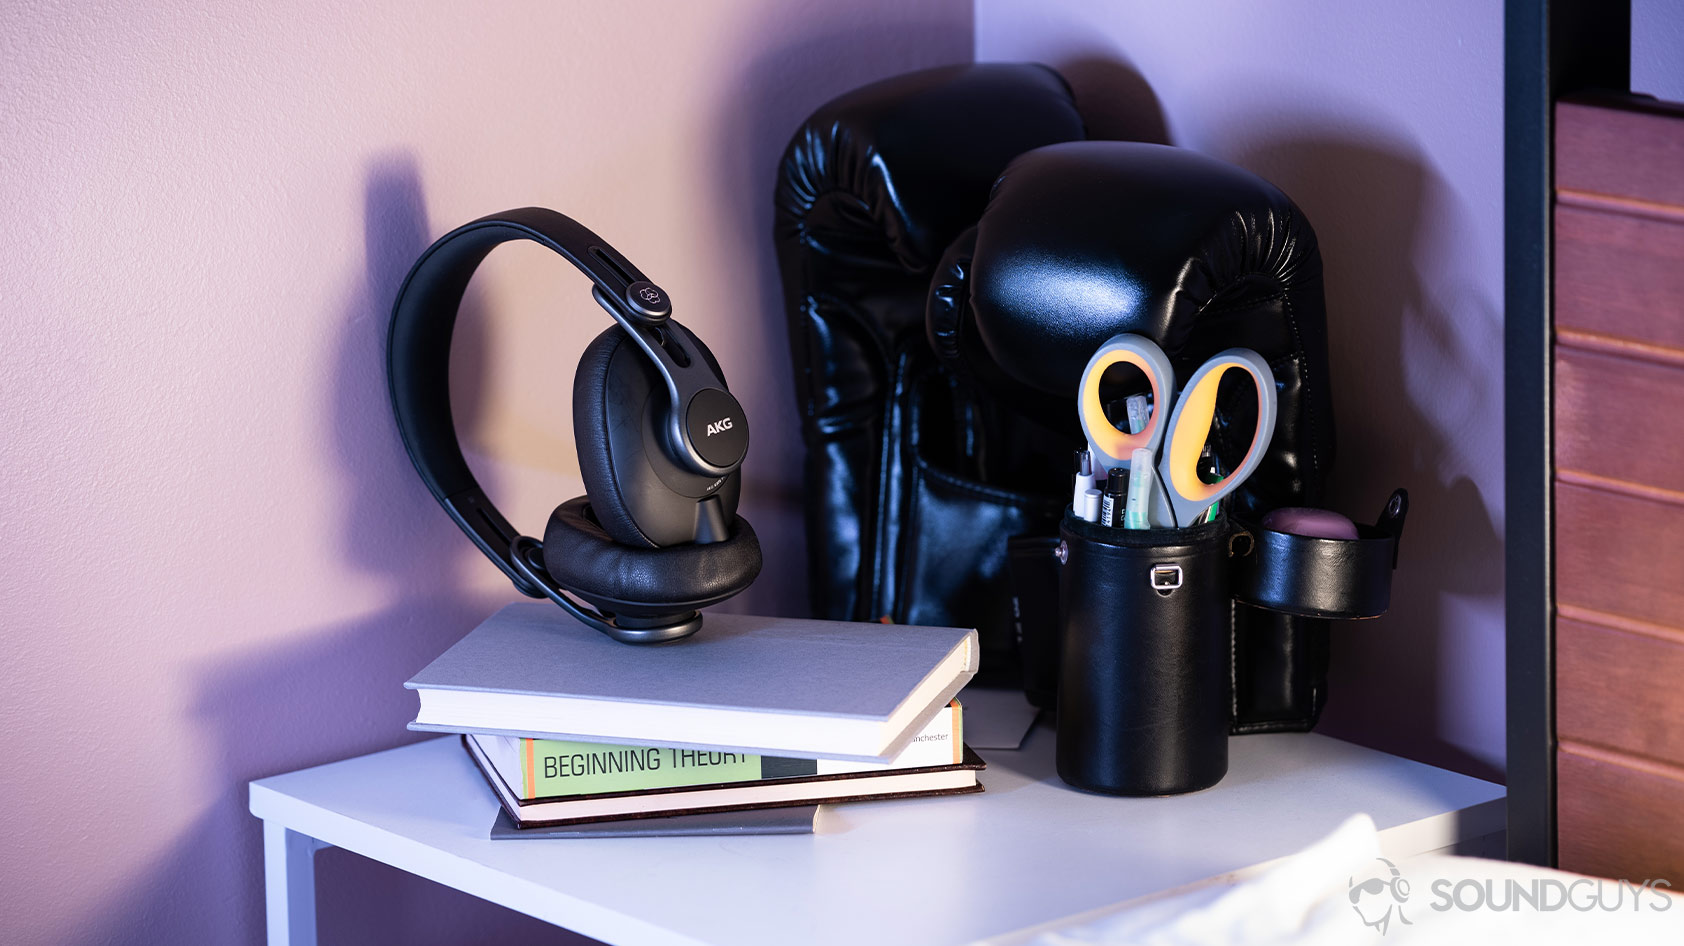 A picture of the AKG K371 wired over-ear headphones on a nightstand in front of boxing gloves.